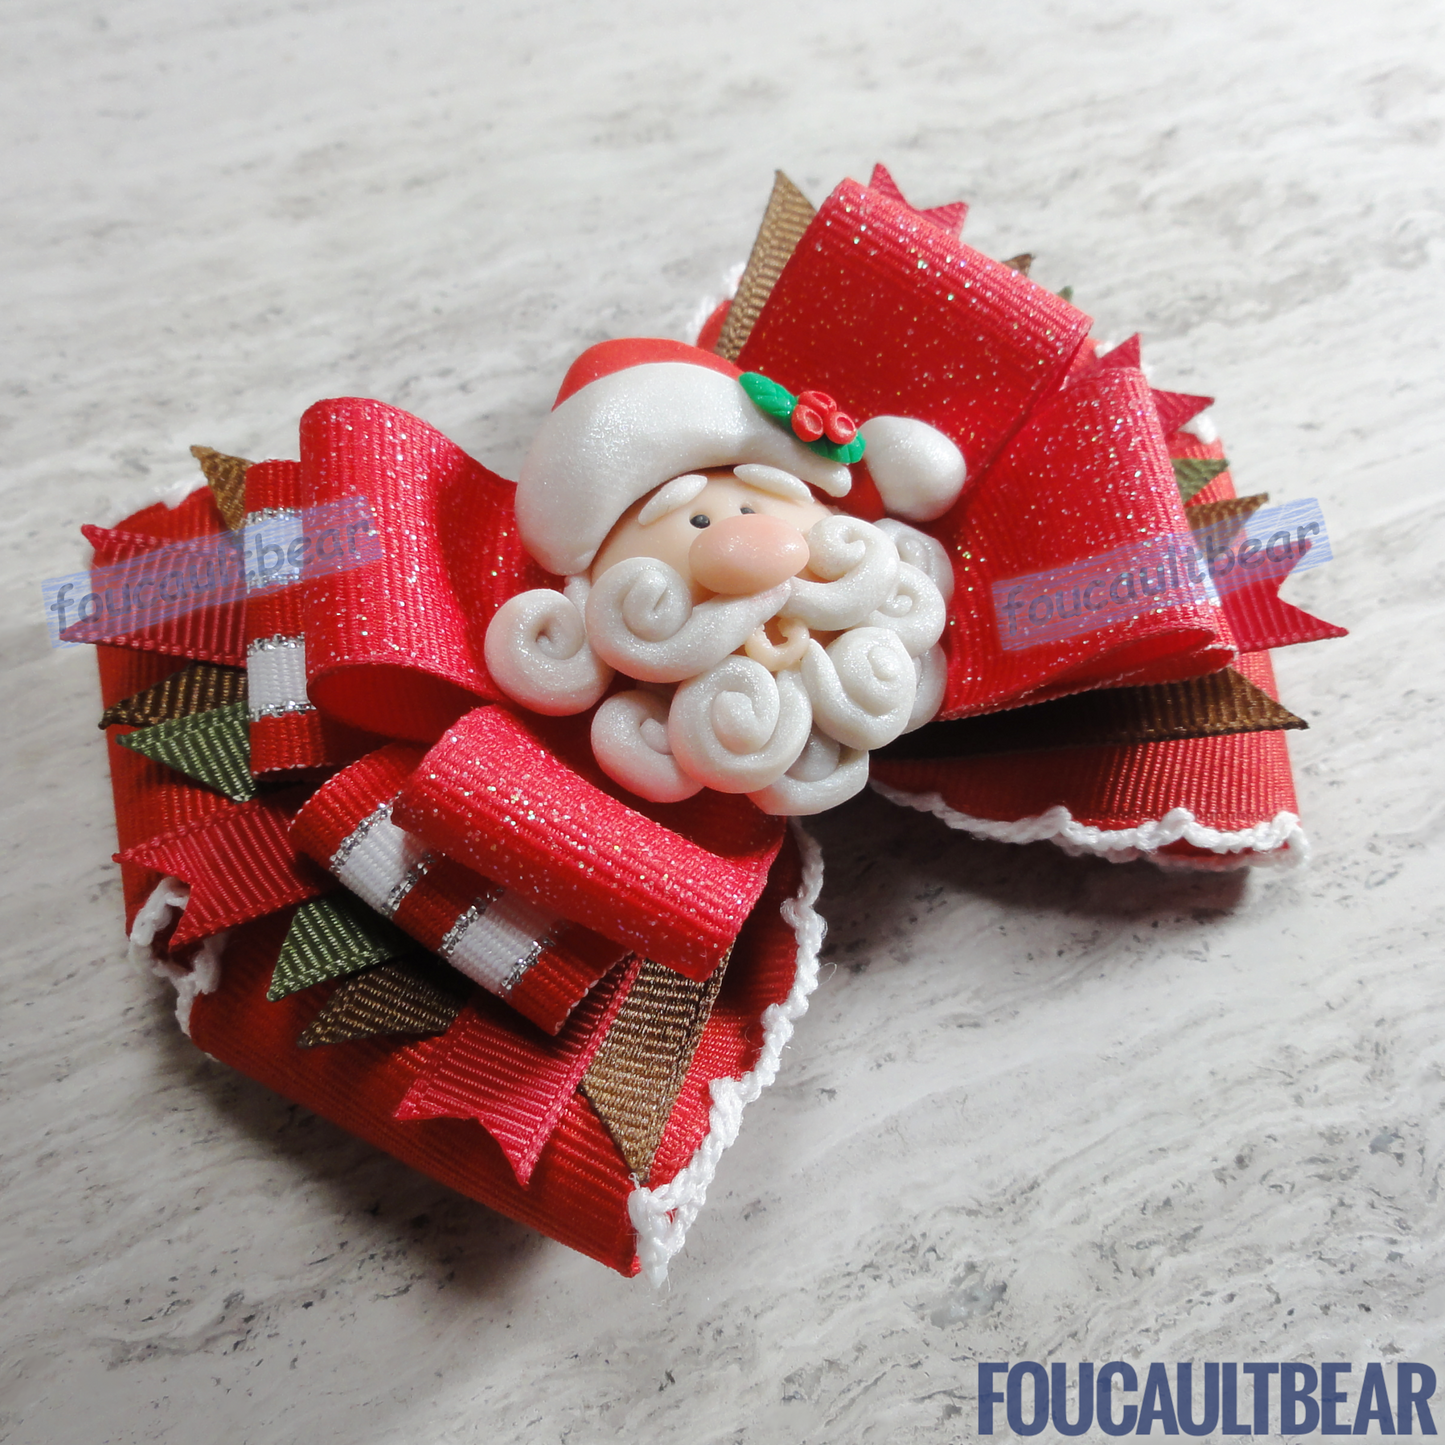 Foucaultbear's HANDMADE MULTI-LAYERED HAIR BOW CLIP with CLAY CENTERPIECE. Jolly Santa Claus with White Trim. Handmade Polymer Clay Centerpiece. Grosgrain Ribbon. French Barrette Hair Bow for Ponytail & Pigtails. Jolly Father Santa Claus with White Trim centerpiece adorns this hair bow barrette. Perfect for toddlers, preschoolers, kindergartners, elementary or even middle-schoolers for the coming Christmas holiday season. Looks great on adults too! 